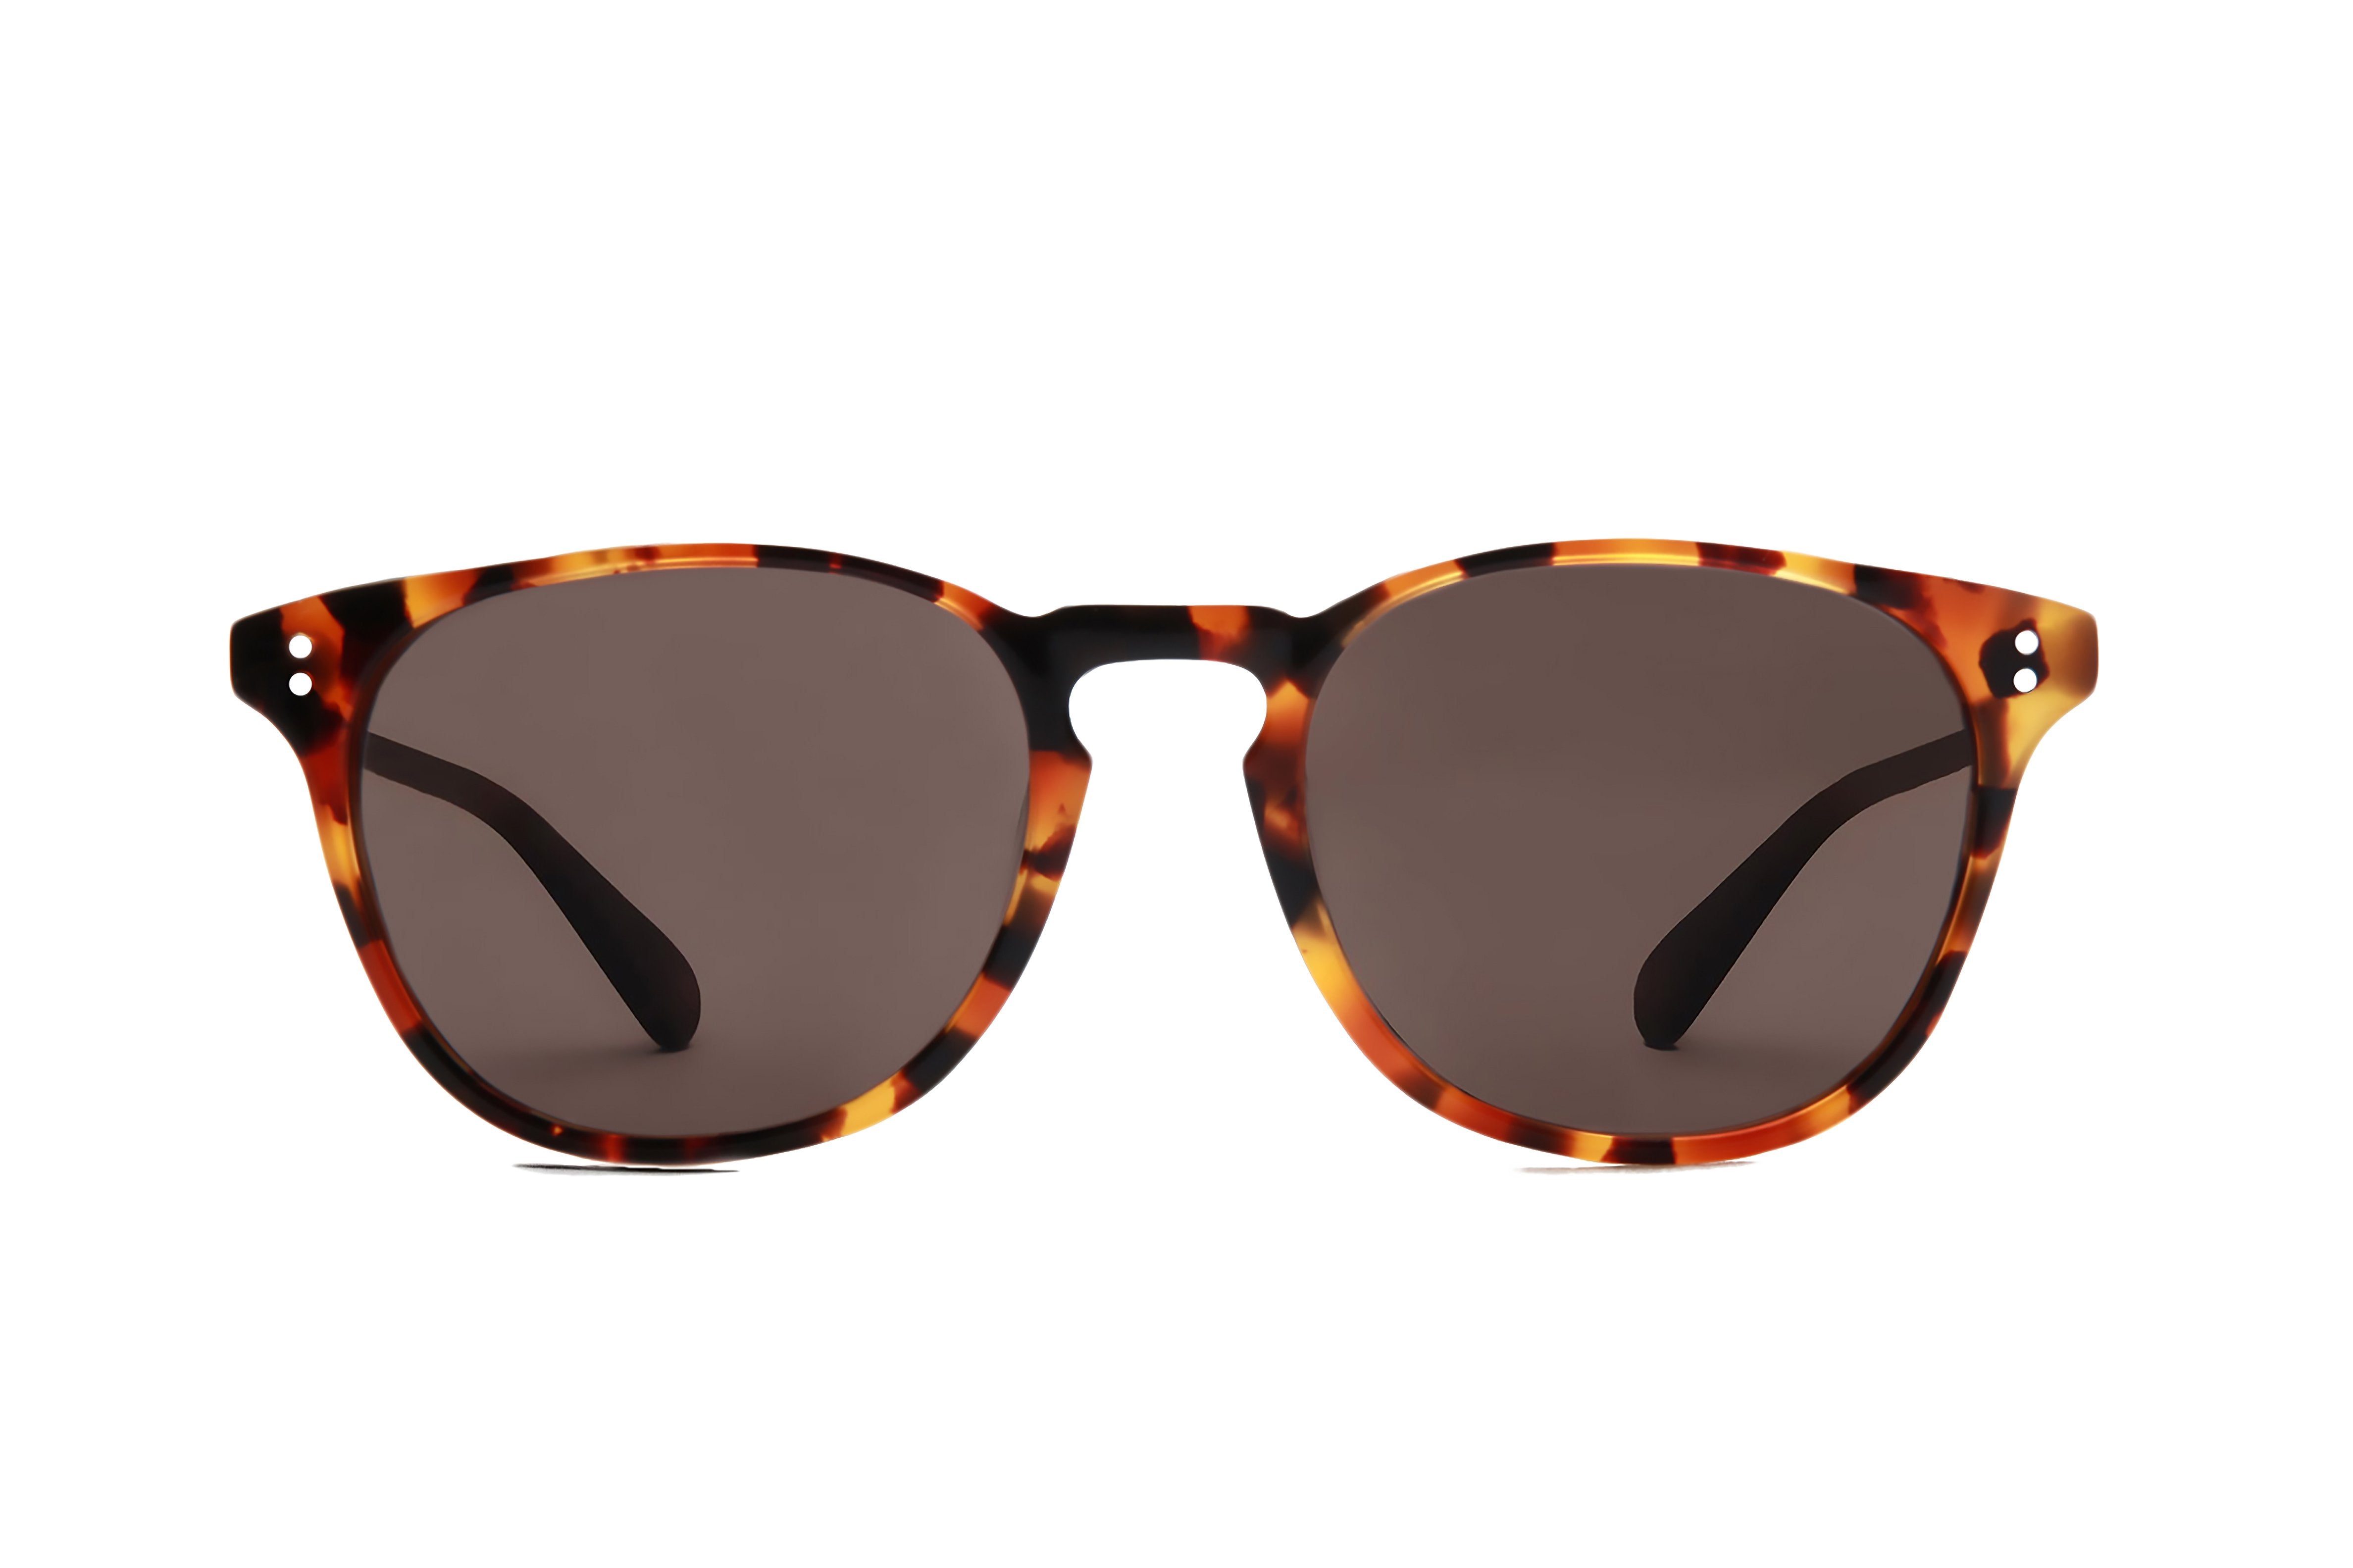 Rocket MTO P3 Classic Caramel Tortoise &amp; Sienna with Brown Polarized Lenses (Tortoise and Crystal)